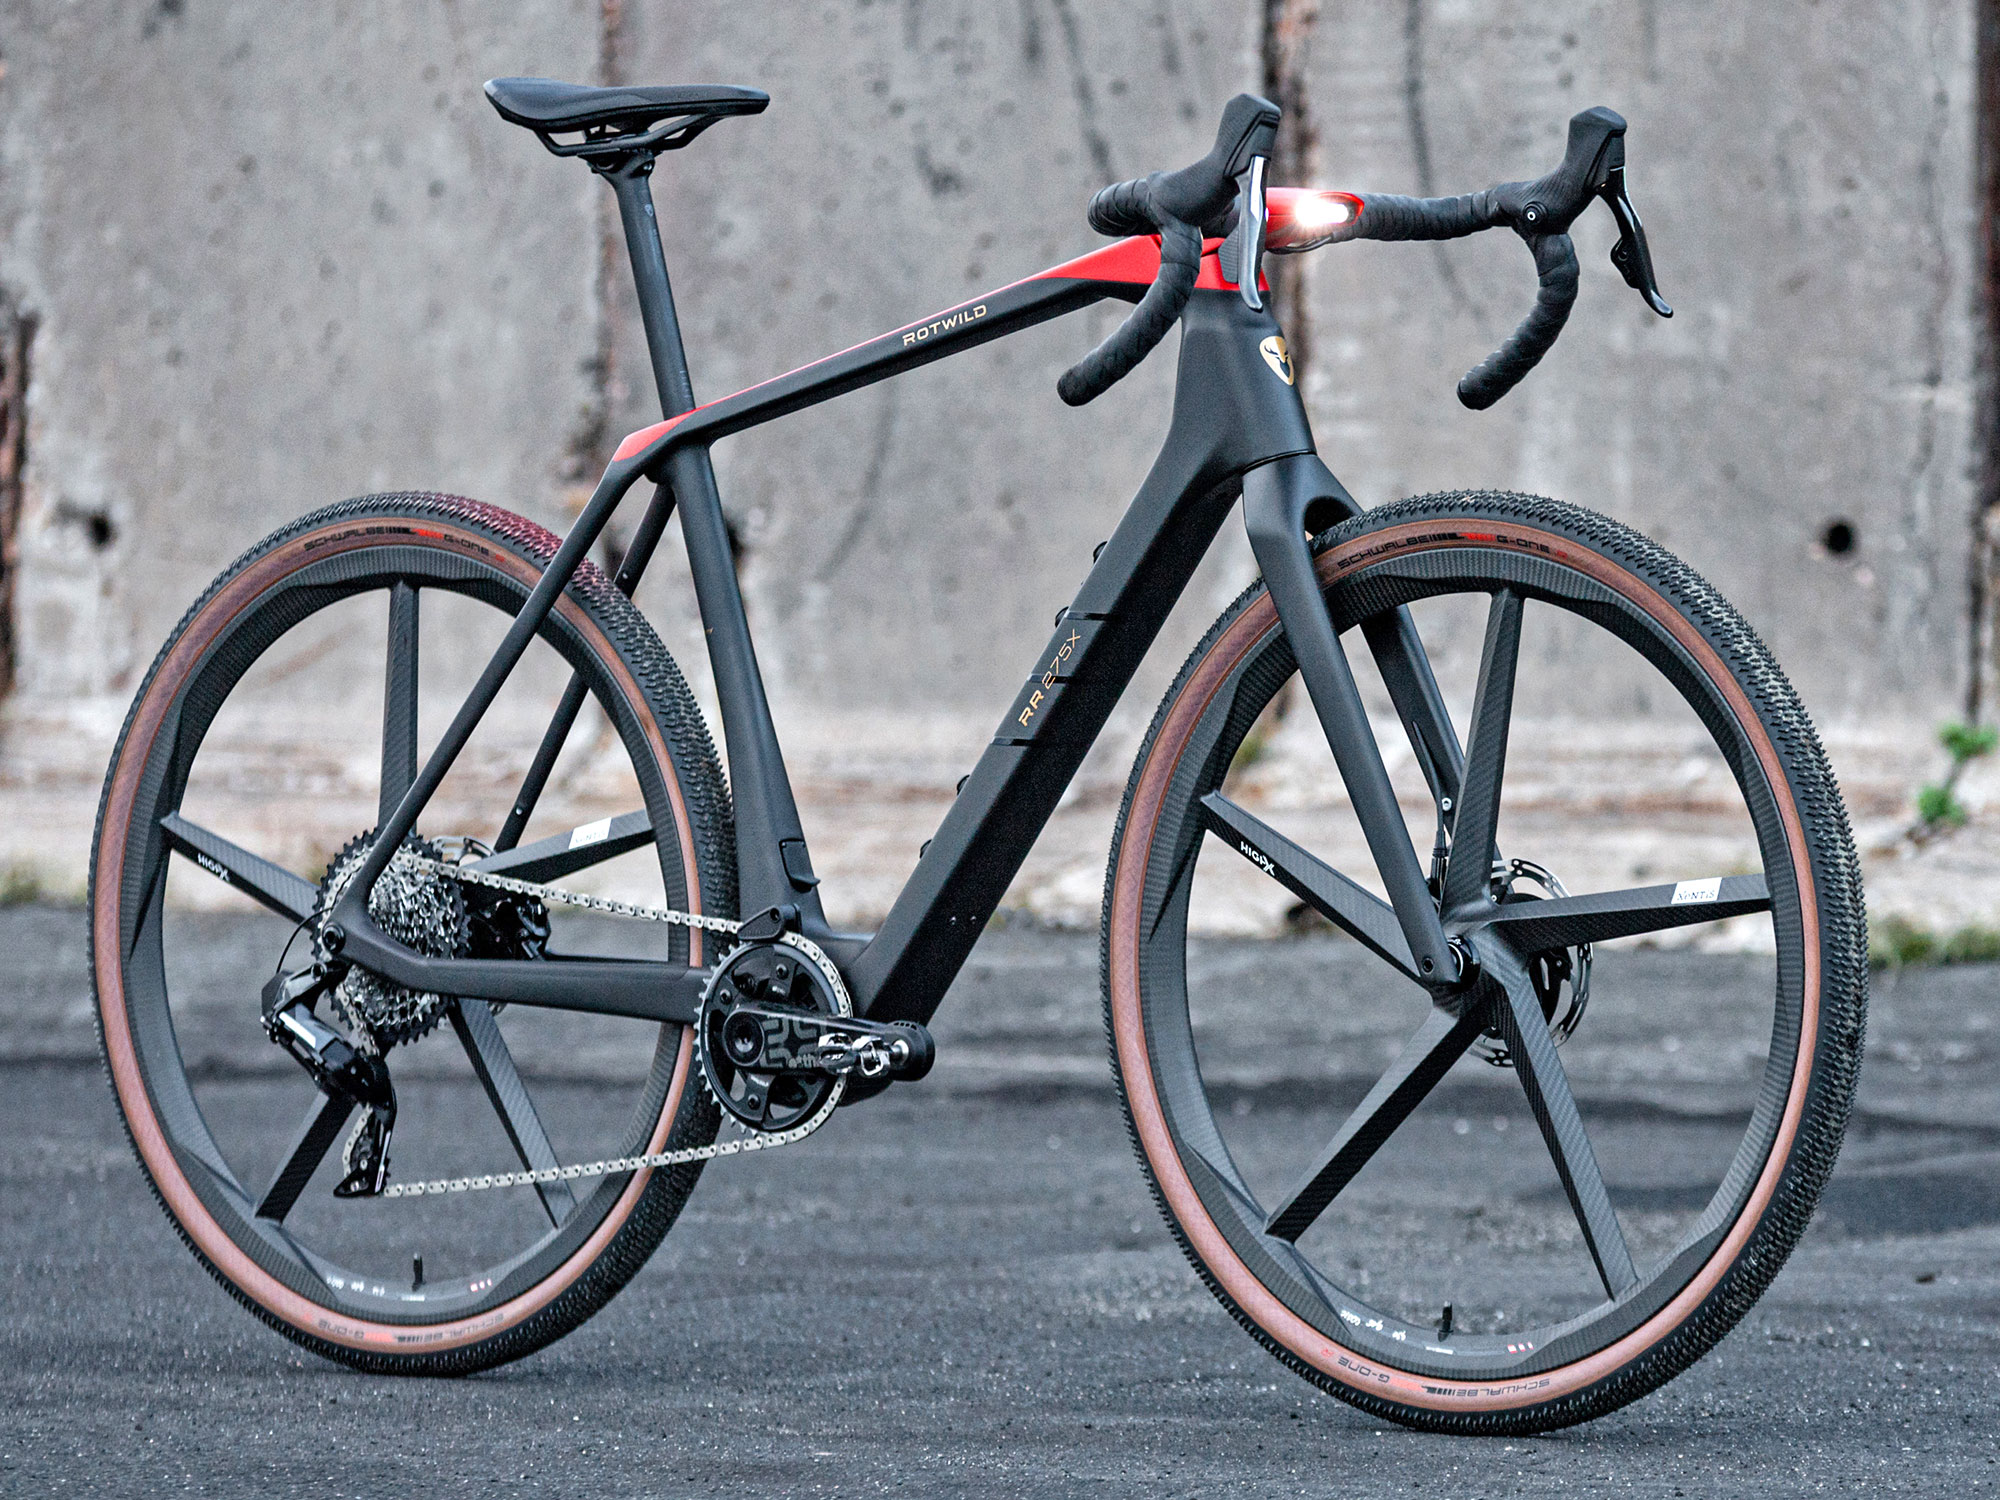 Rotwild R-R275 X gravel ebike, a lightweight TQ-powered fully integrated all-road e-bike, angled